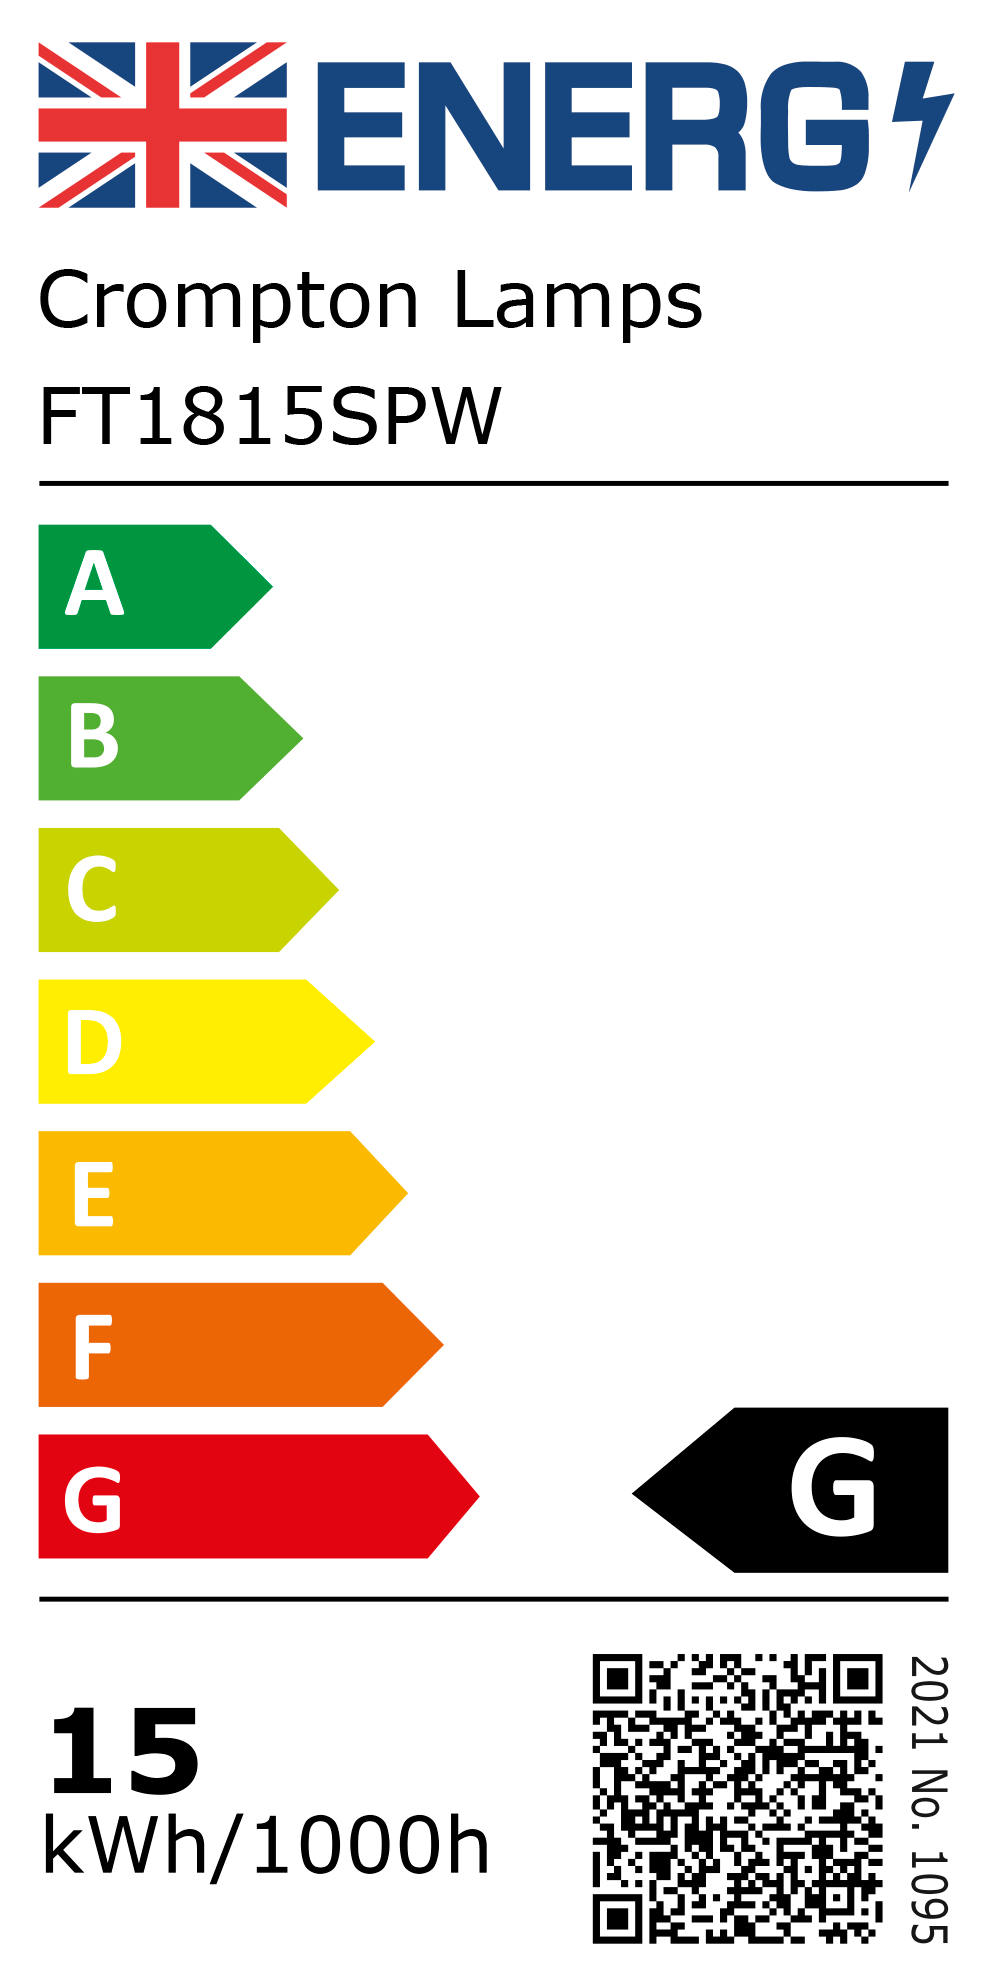 New 2021 Energy Rating Label: Stock Code FT1815SPW